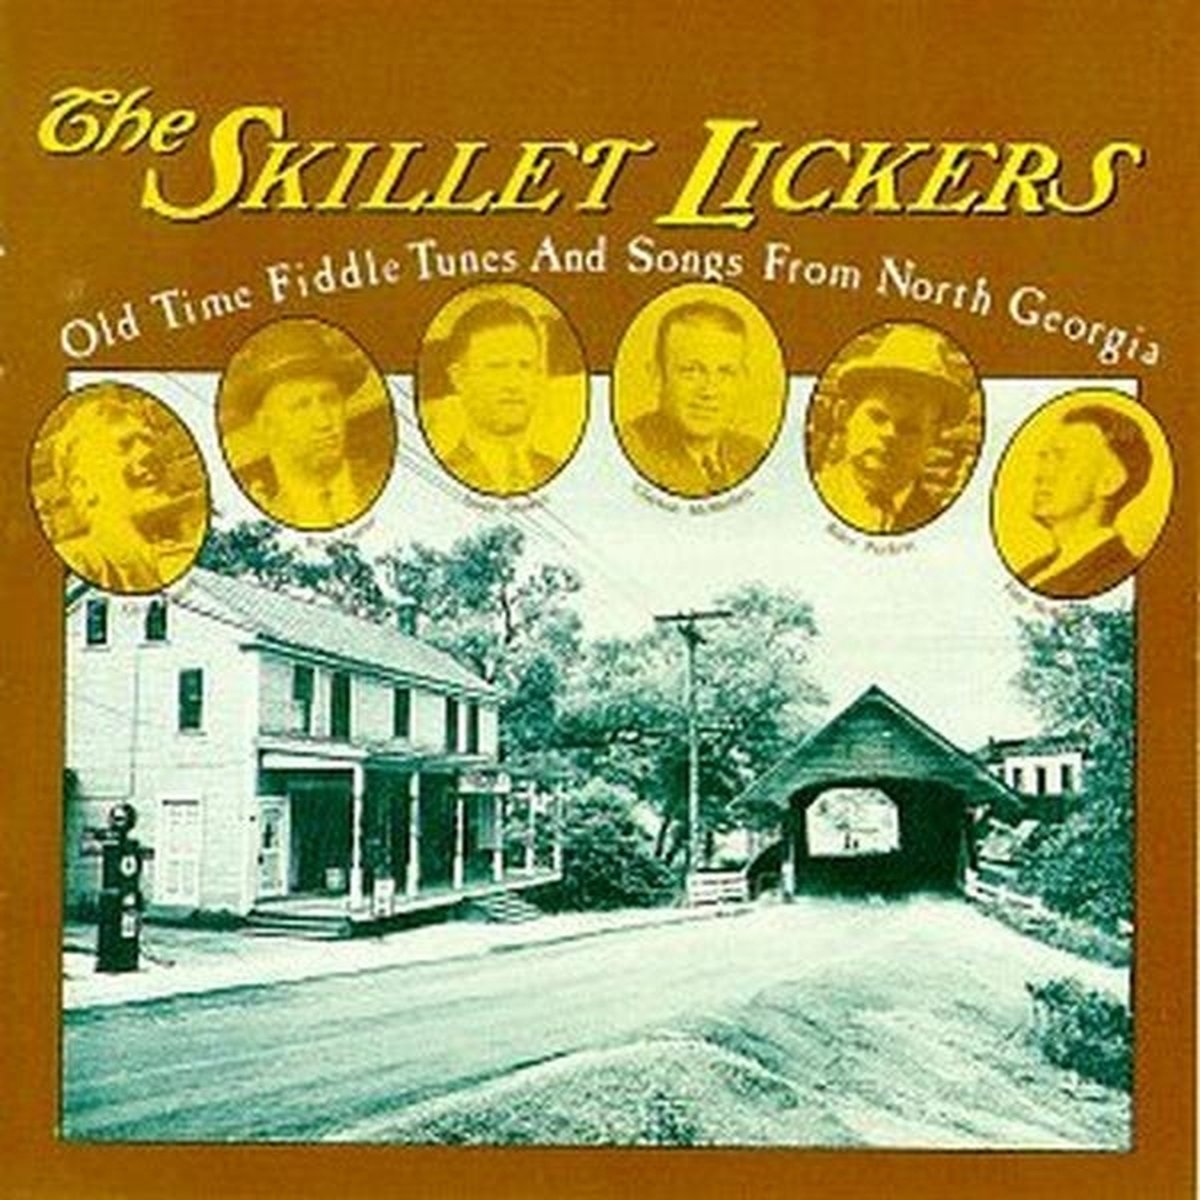 old-time-fiddle-tunes-s-gid-tanner-his-skillet-lickers-cd-album